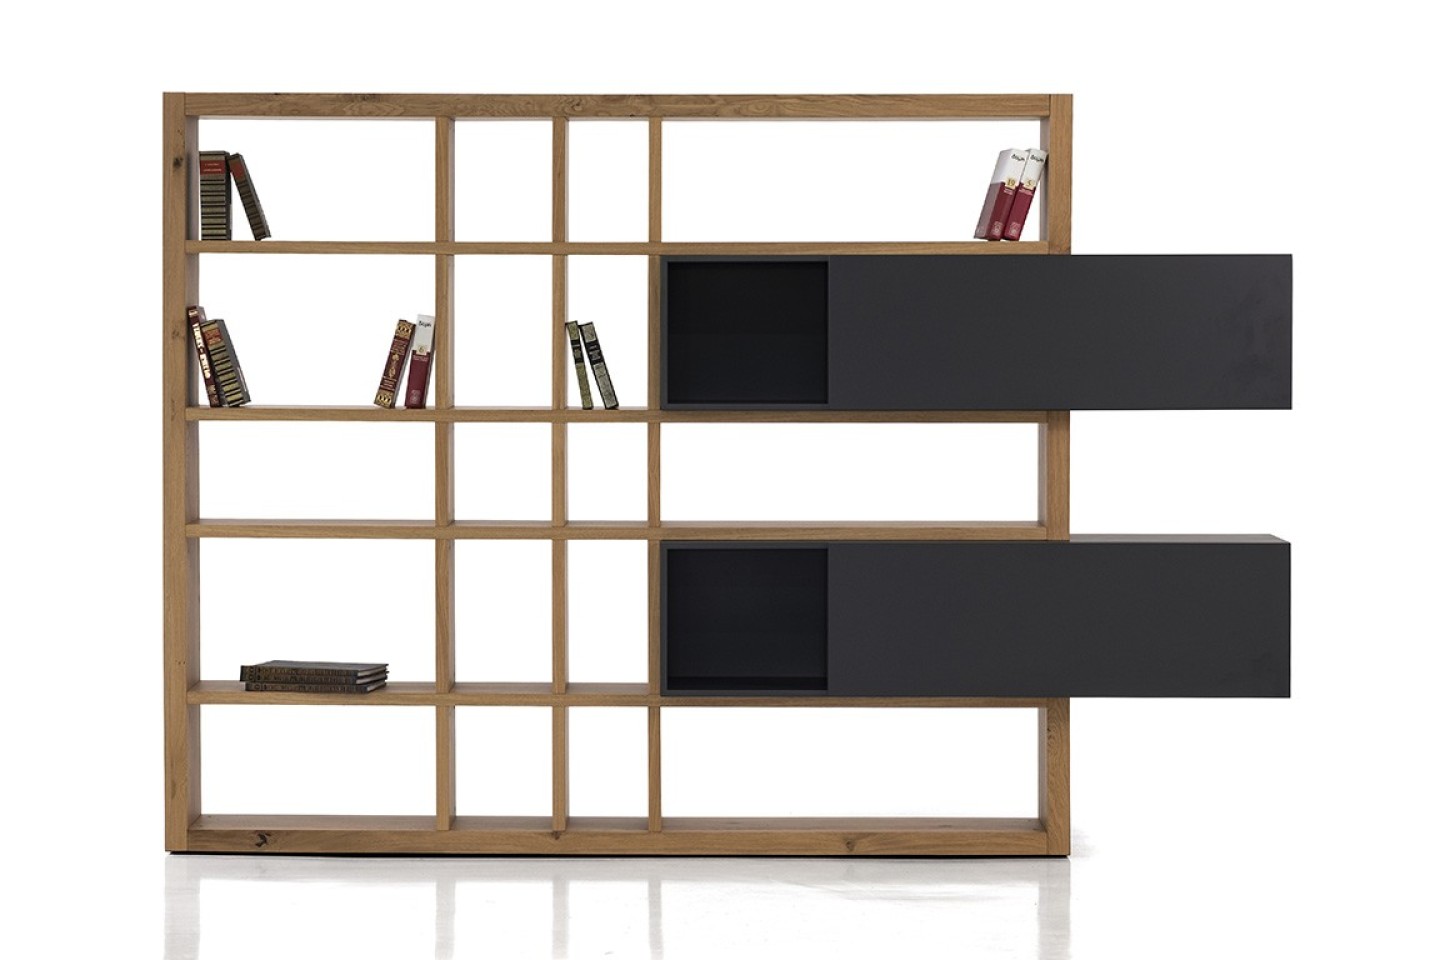 THE SPACE BOOKCASE